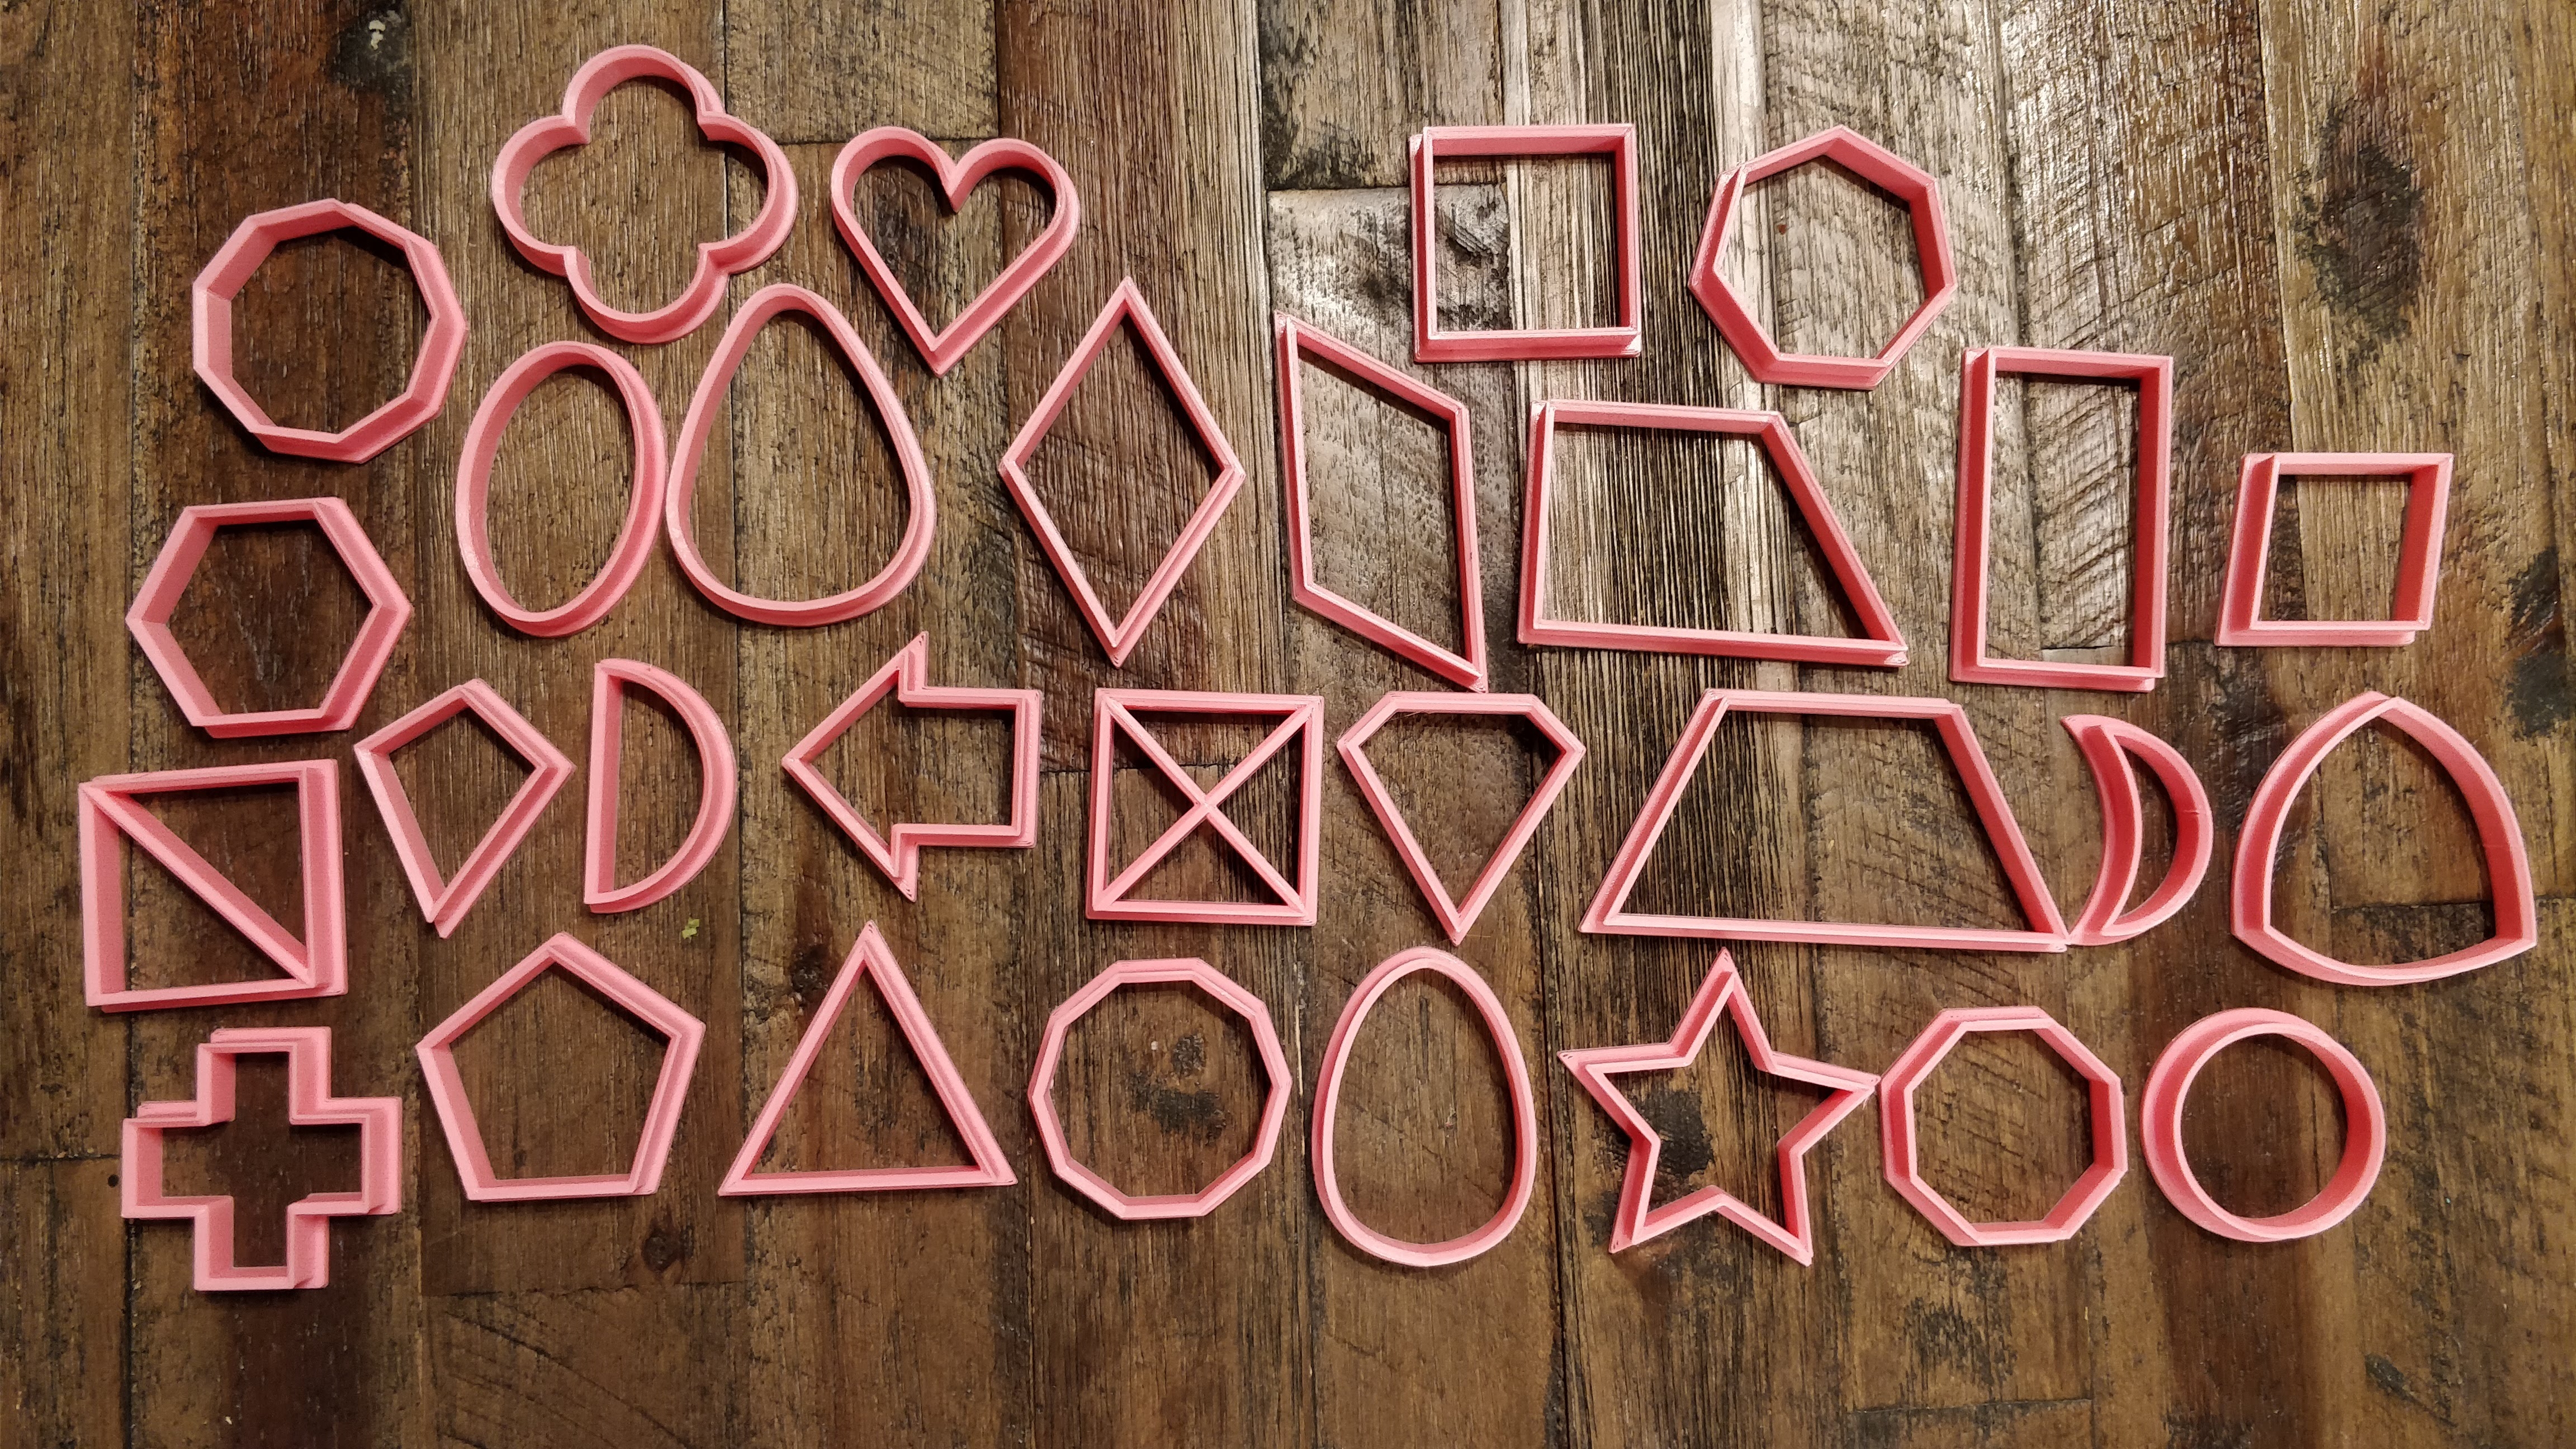 Play-Doh/Montessori Shapes/Cookie Cutters